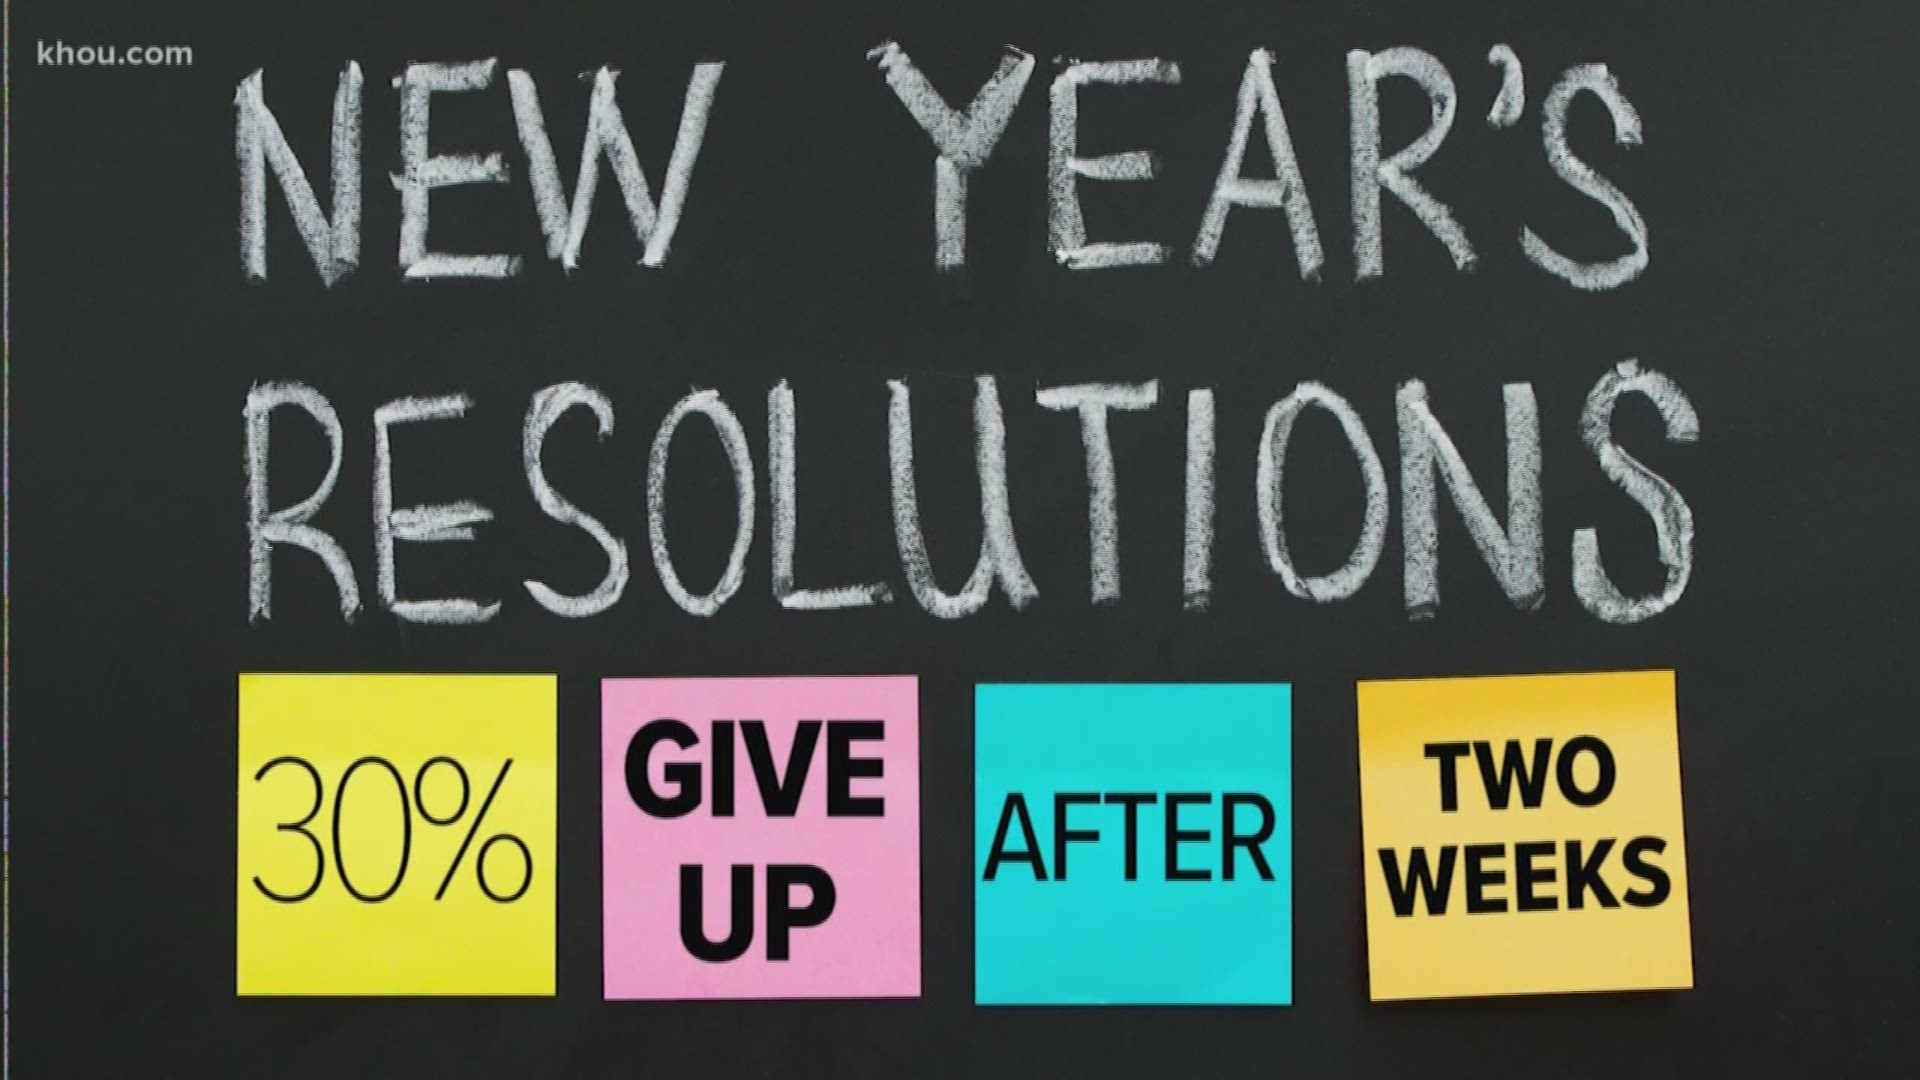 The new year means it's almost time to kick start those resolutions. But sometimes, it's a promise easier said than done.